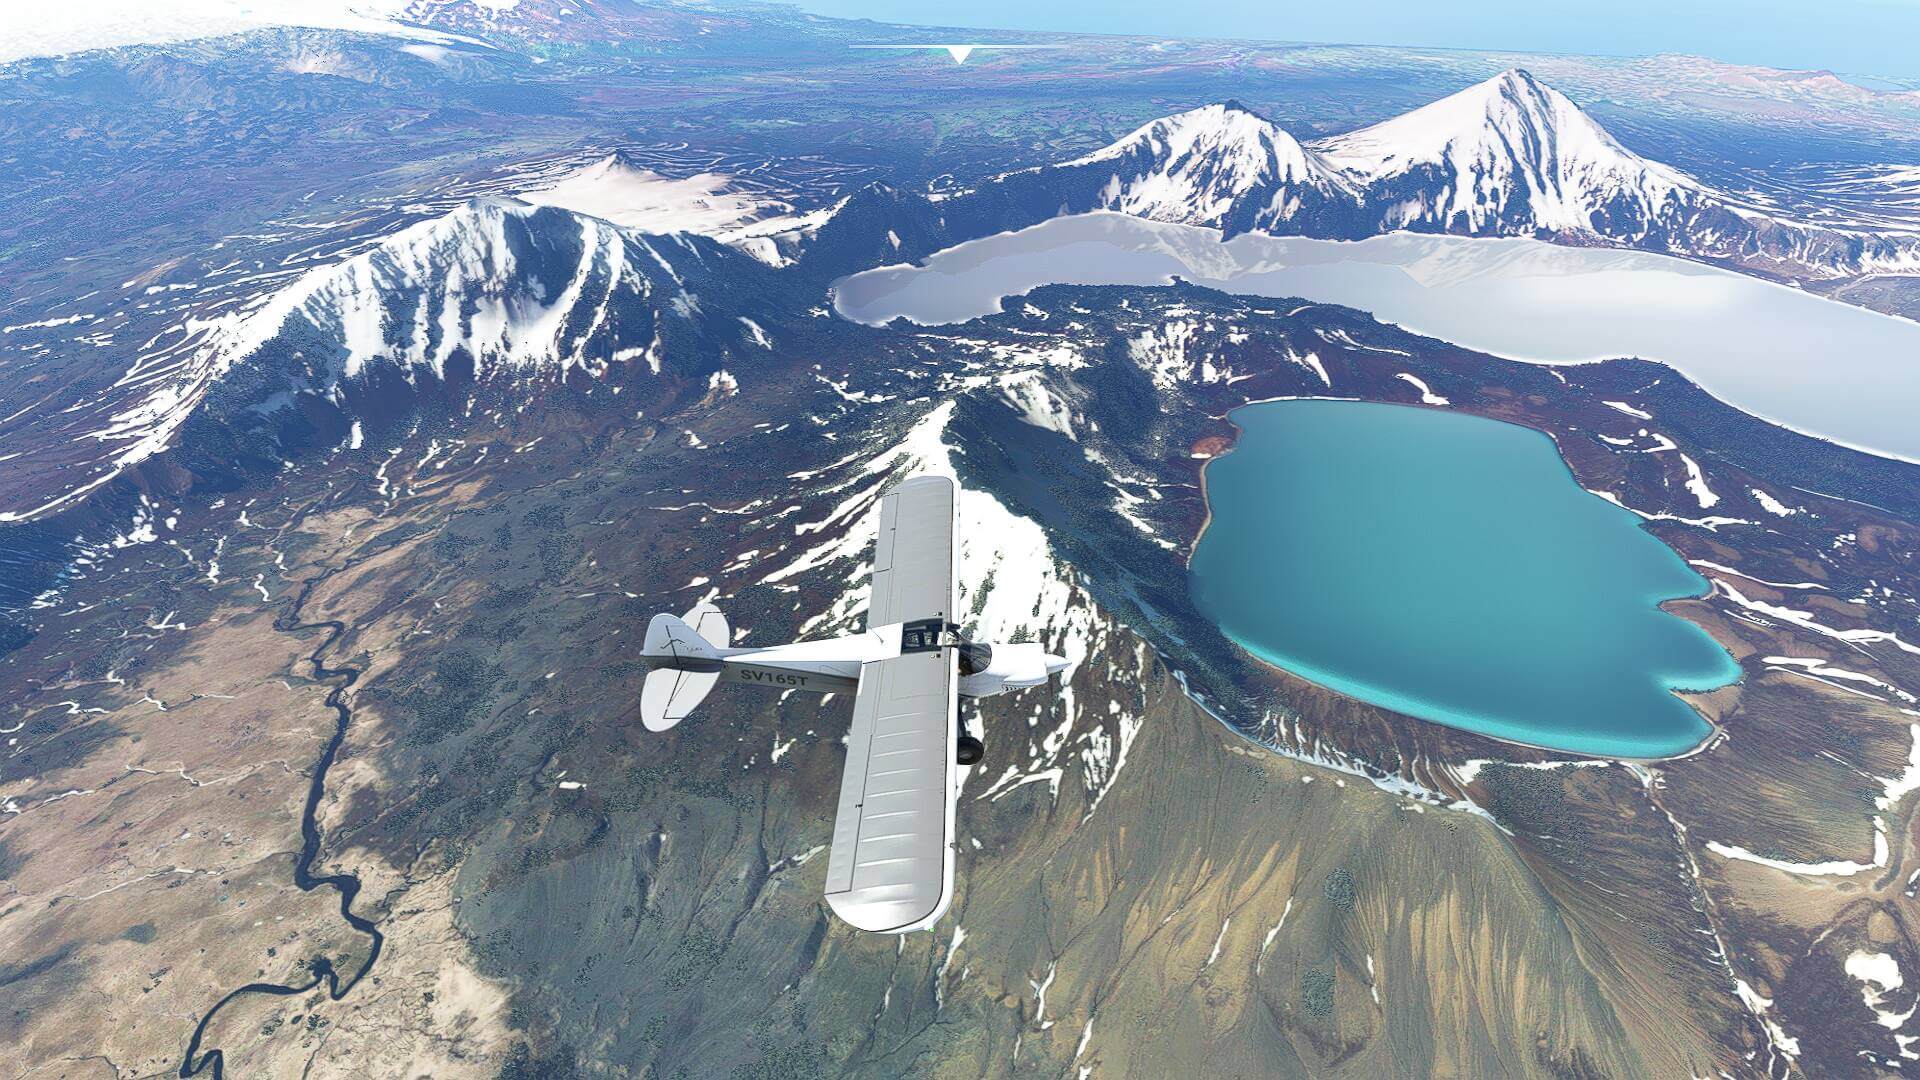 Plane flying over a blue lake in the snowy mountains